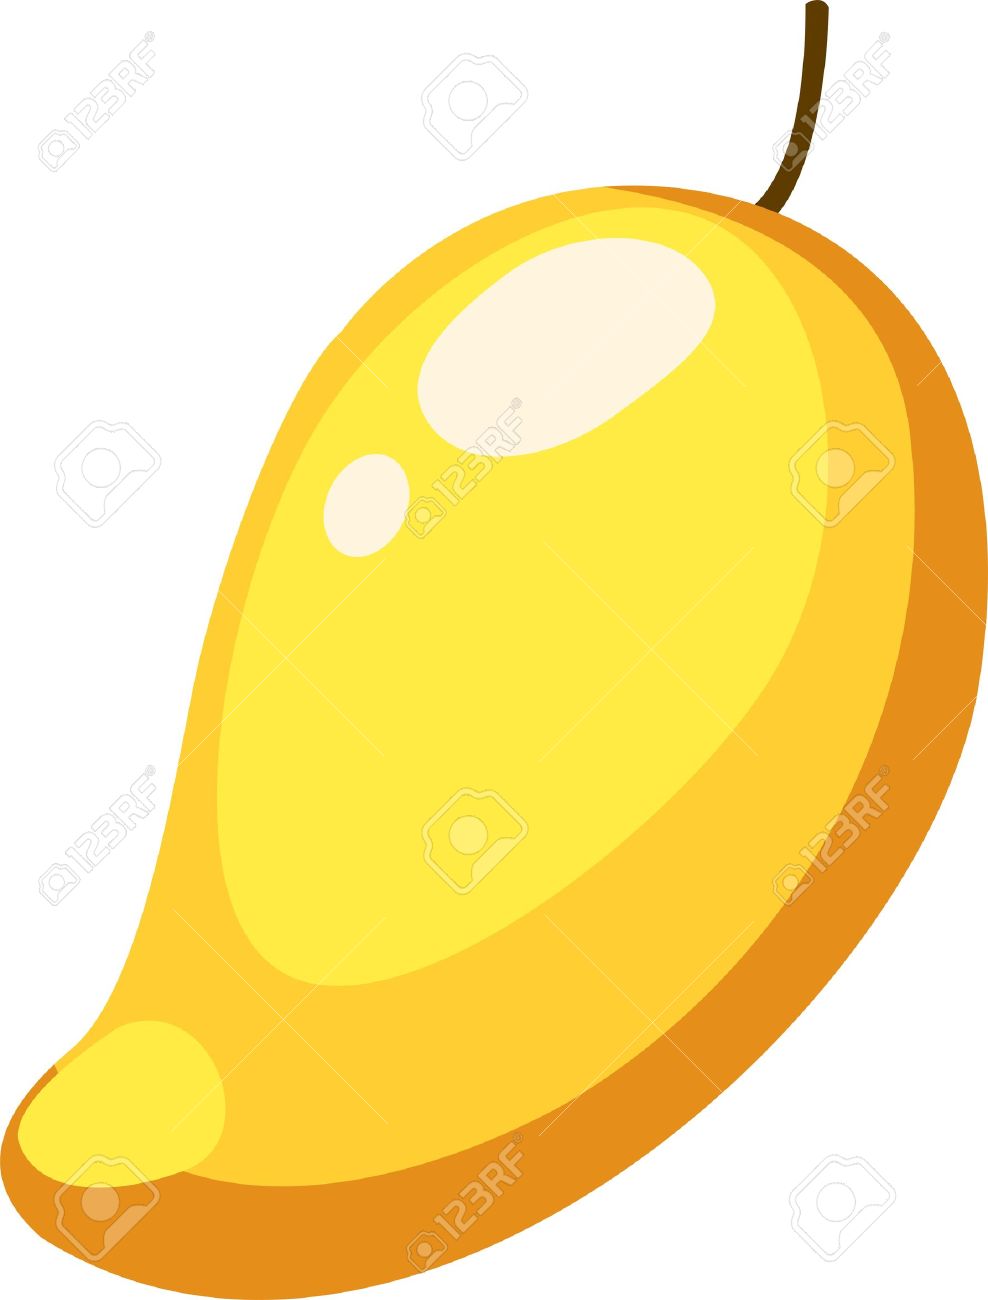 956 Yellow Mango Cliparts, Stock Vector And Royalty Free Yellow.